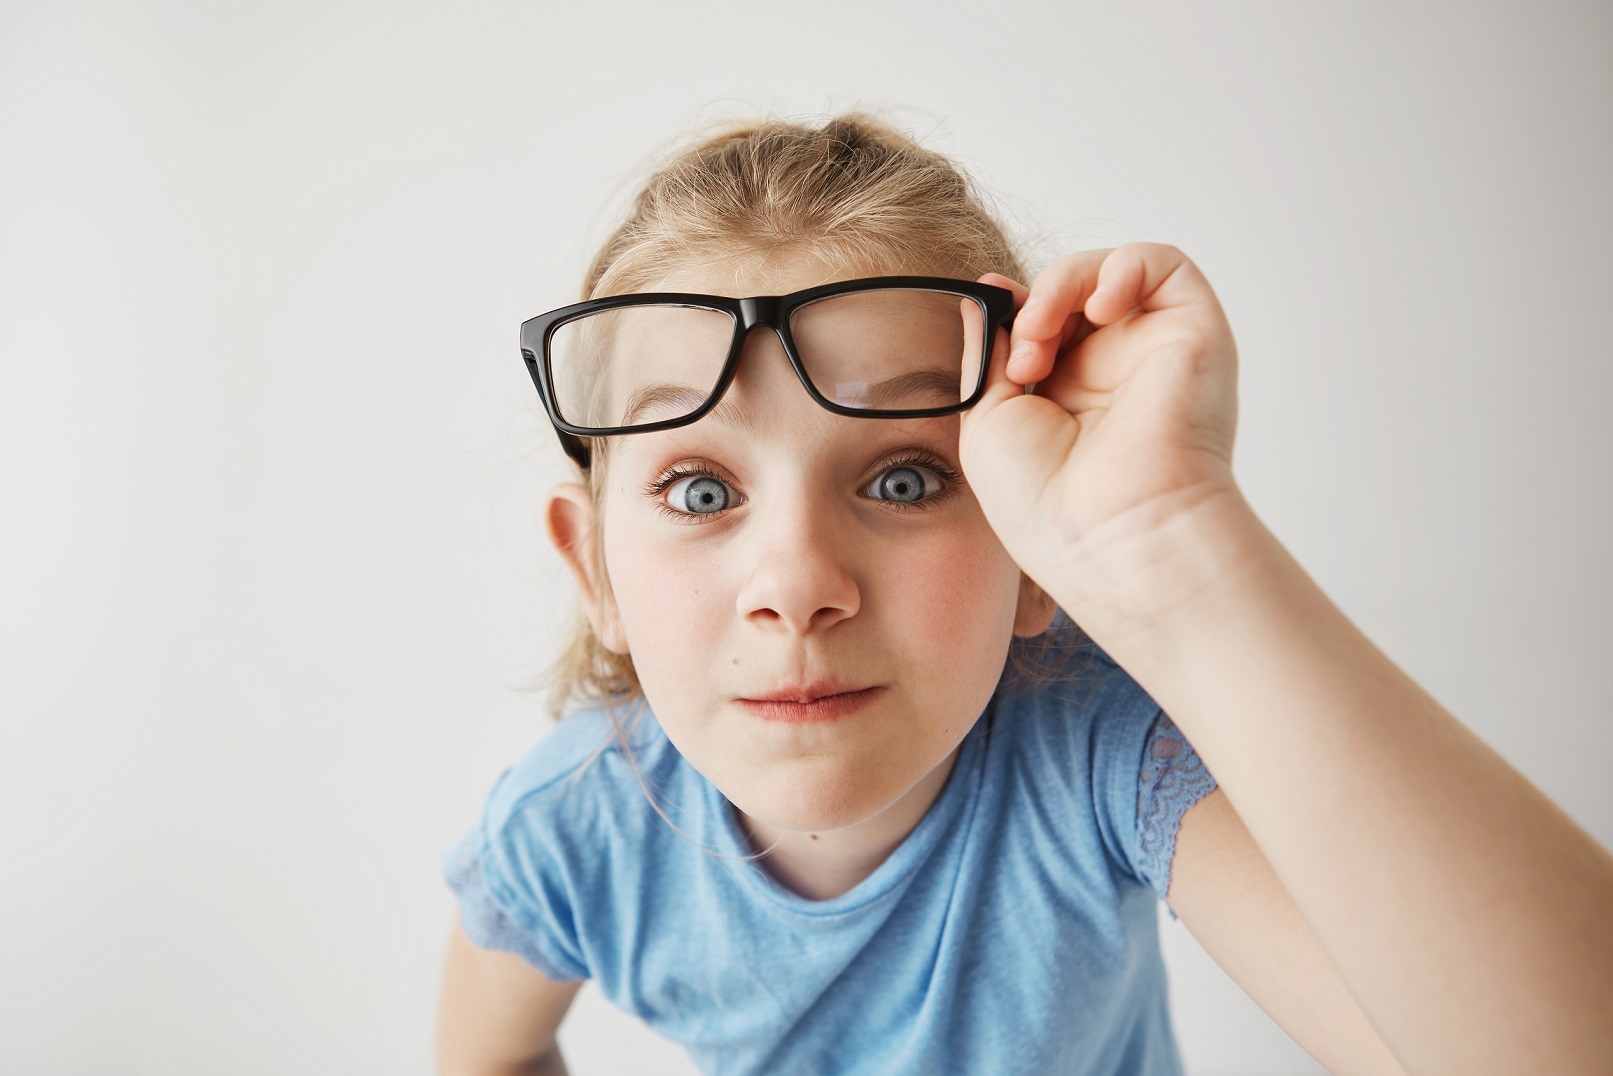 A child with glasses